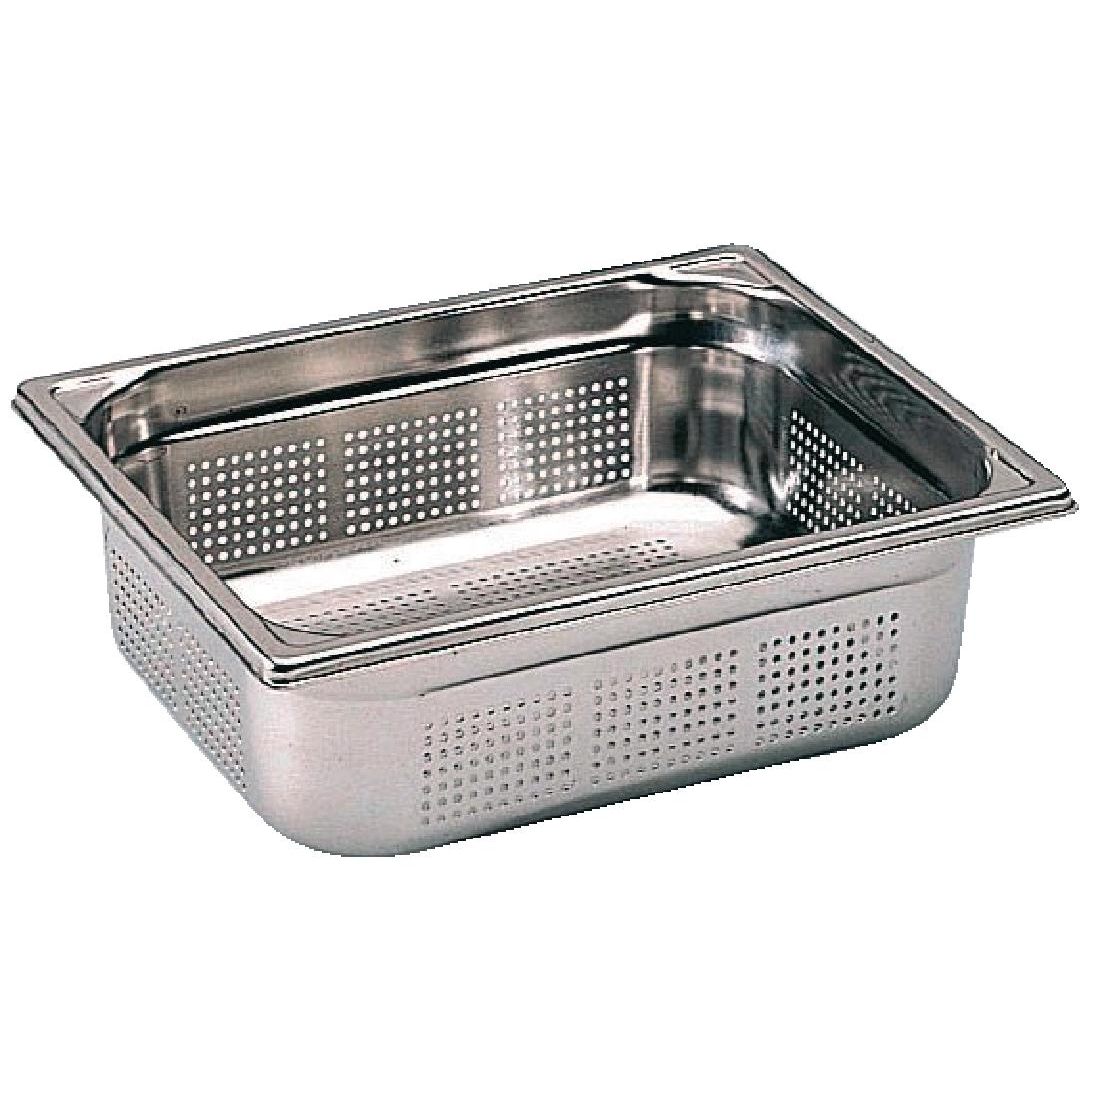 Bourgeat Stainless Steel Perforated 1/2 Gastronorm Pan 100mm